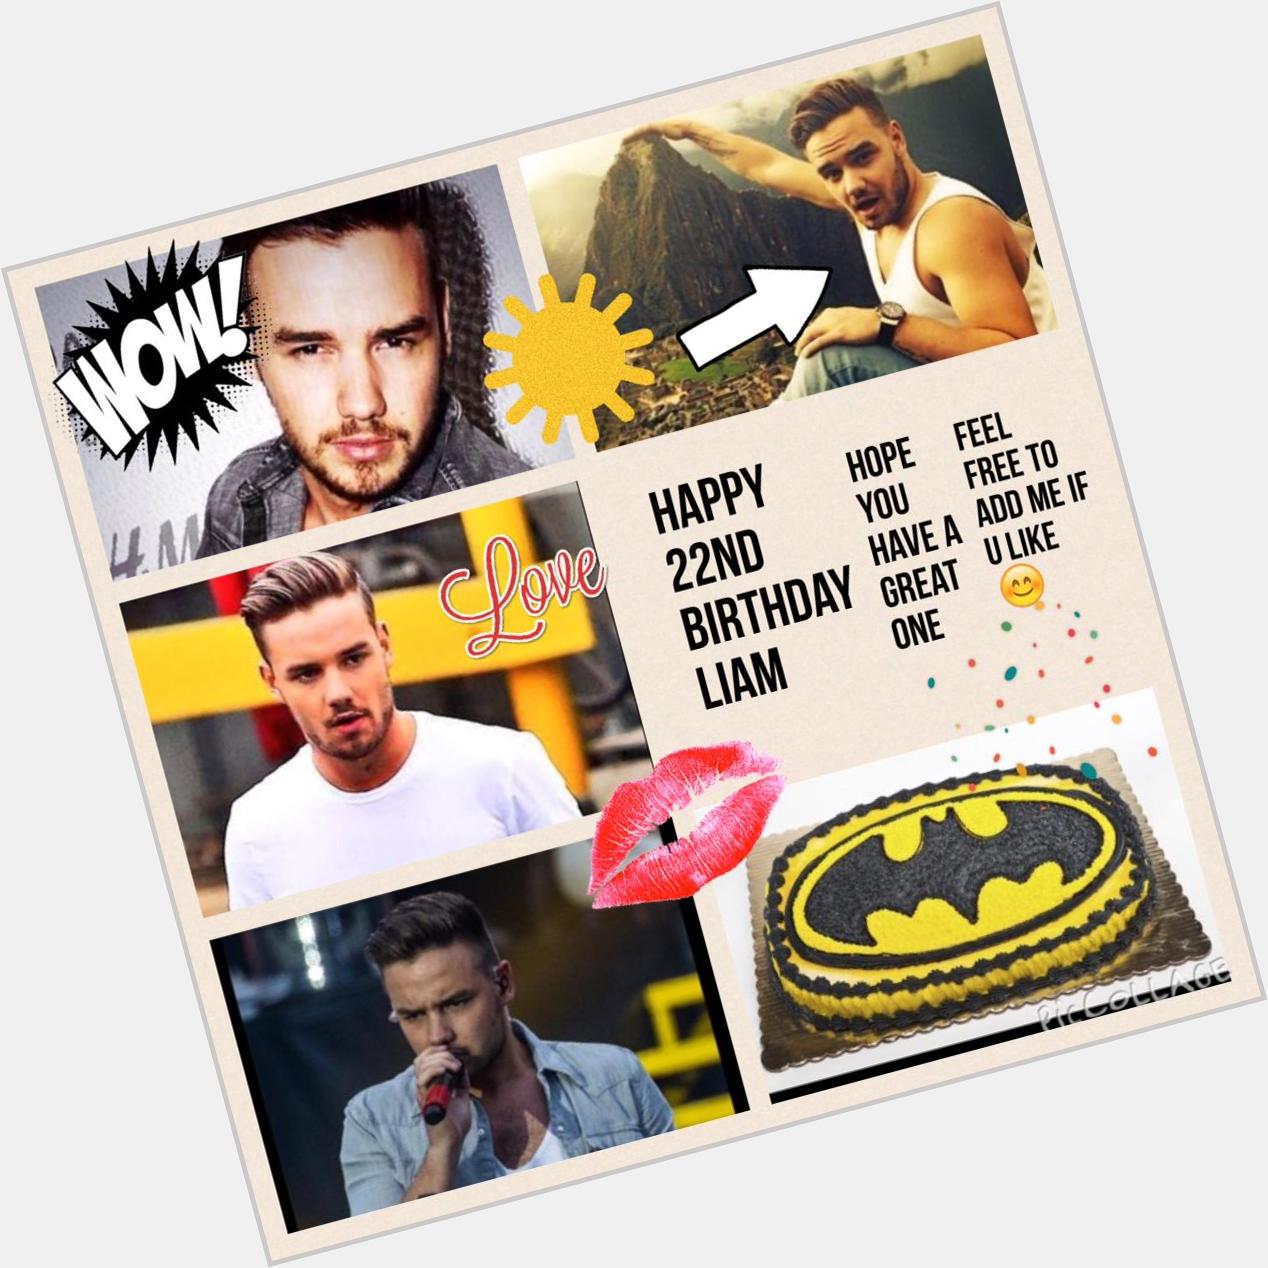  happy birthday for tommorow Liam hope u have a belta one im newish to message but could u follow me? 